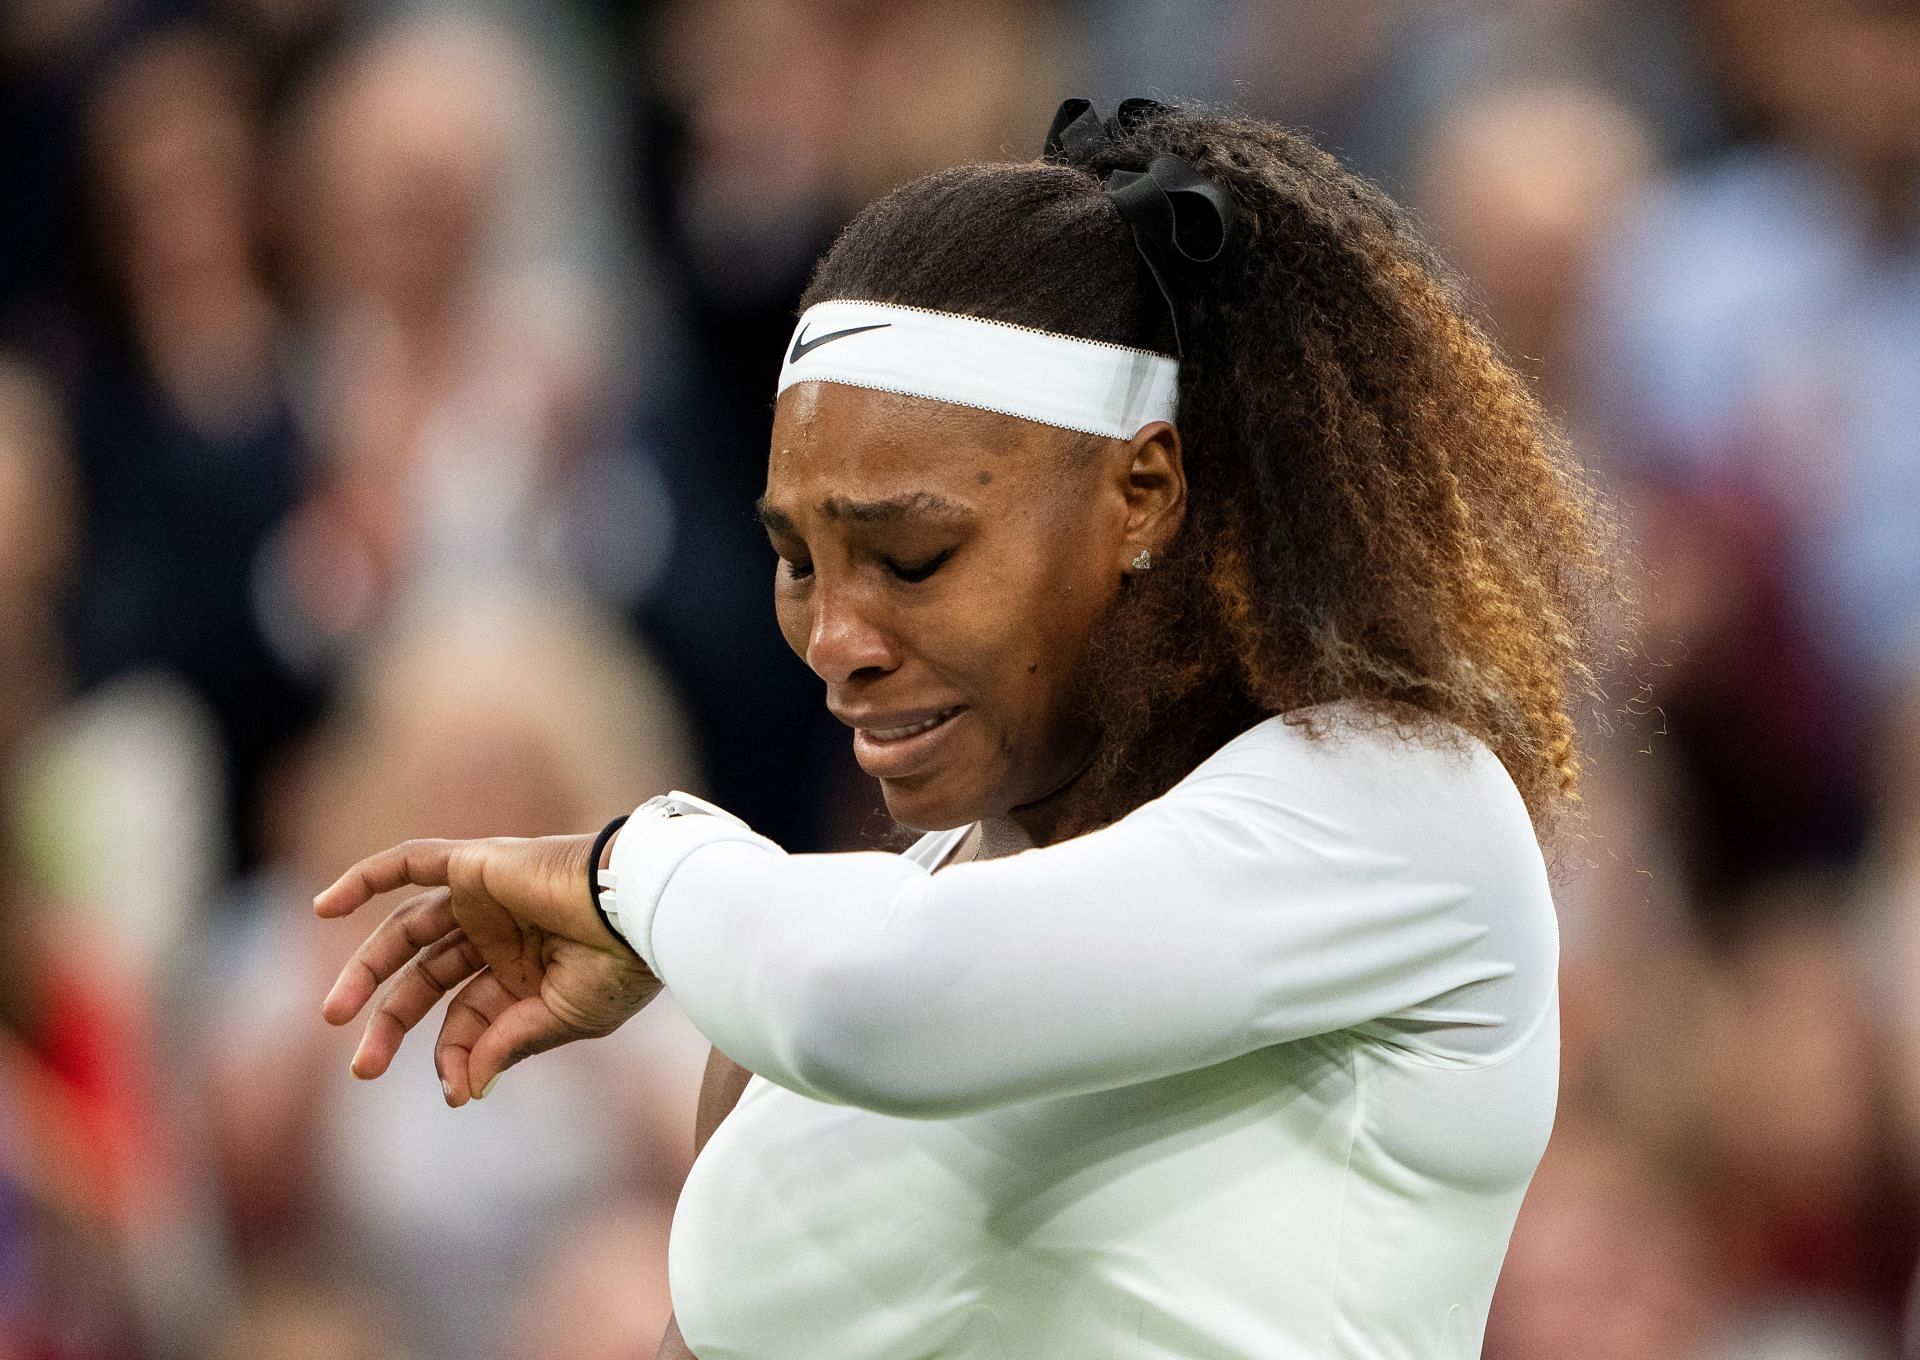 The 40-year-old reacts after retiring from her first-round match at Wimbledon due to a hamstring injury